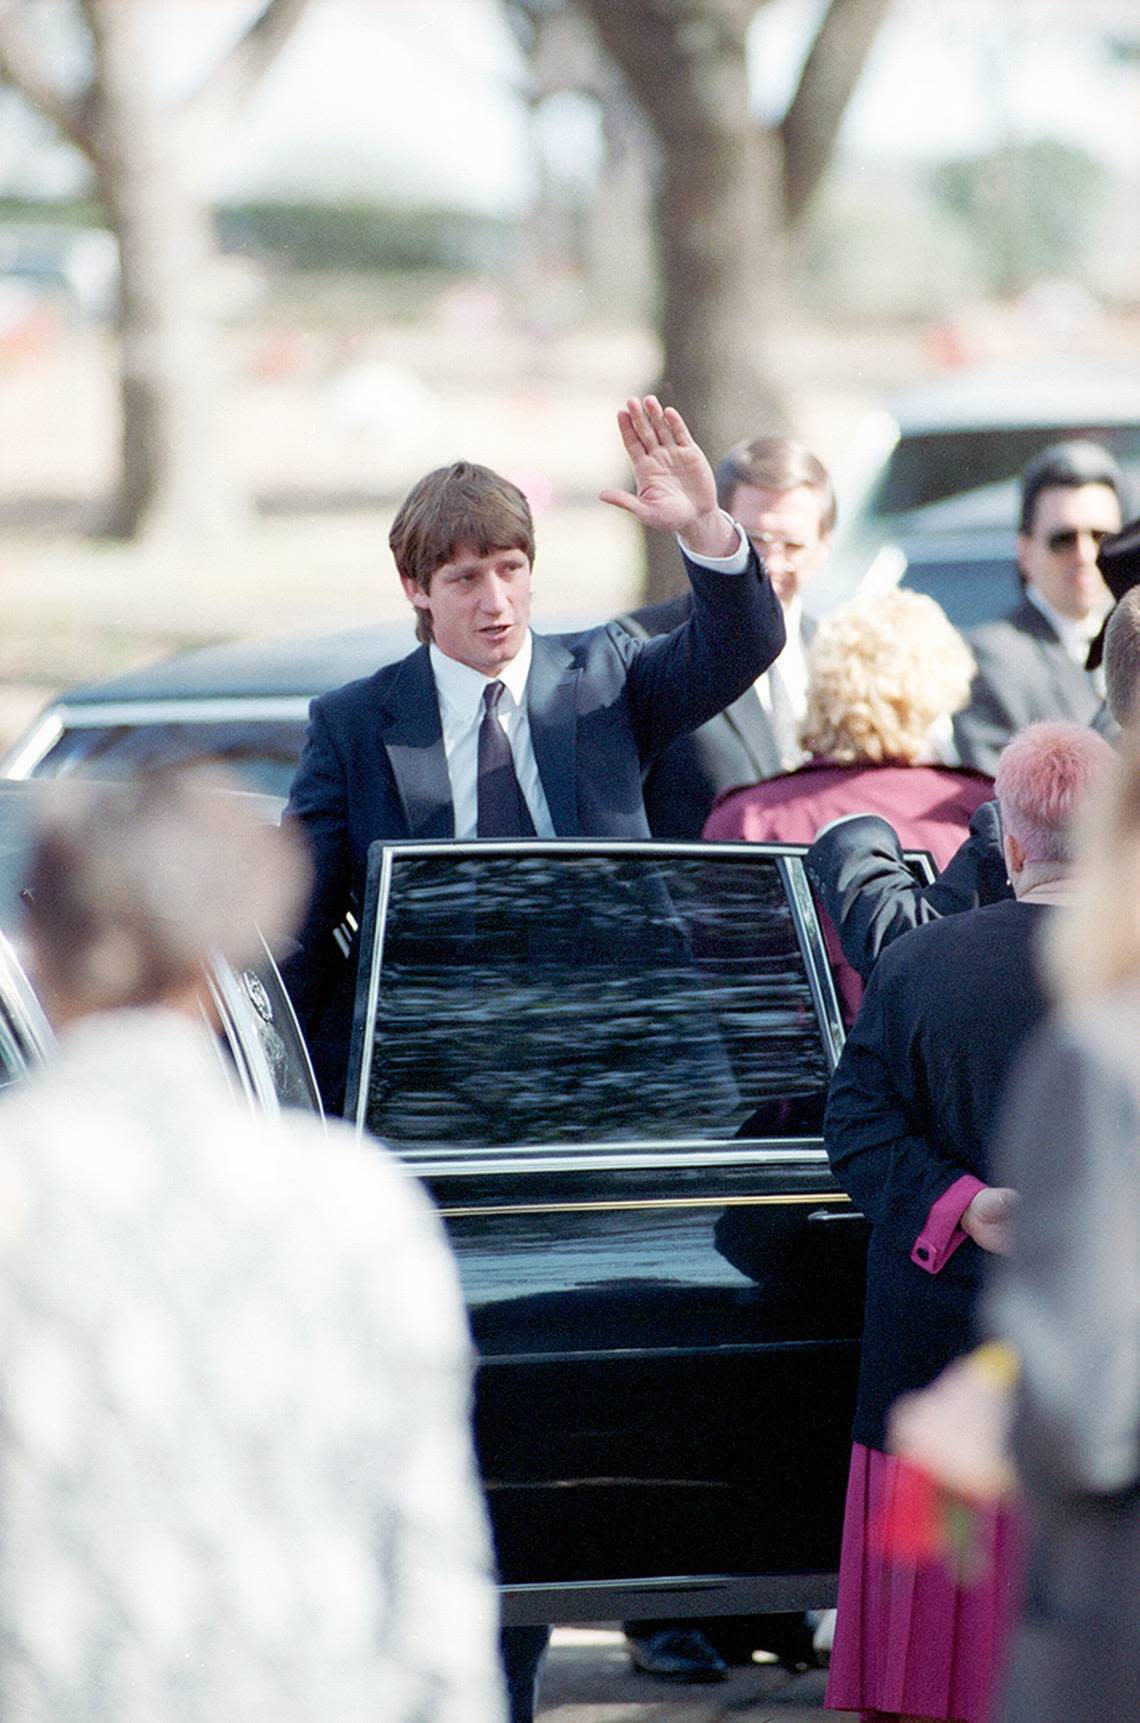 February 22, 1993: Wrestler Kerry Von Erich’s funeral held at First Baptist Church in Dallas. His brother, Kevin Von Erich, waves as he leaves the graveside ceremony at Grove Hill Cemetery in Dallas. Jerry W. Hoefer/Fort Worth Star-Telegram/UT Arlington Special Collections